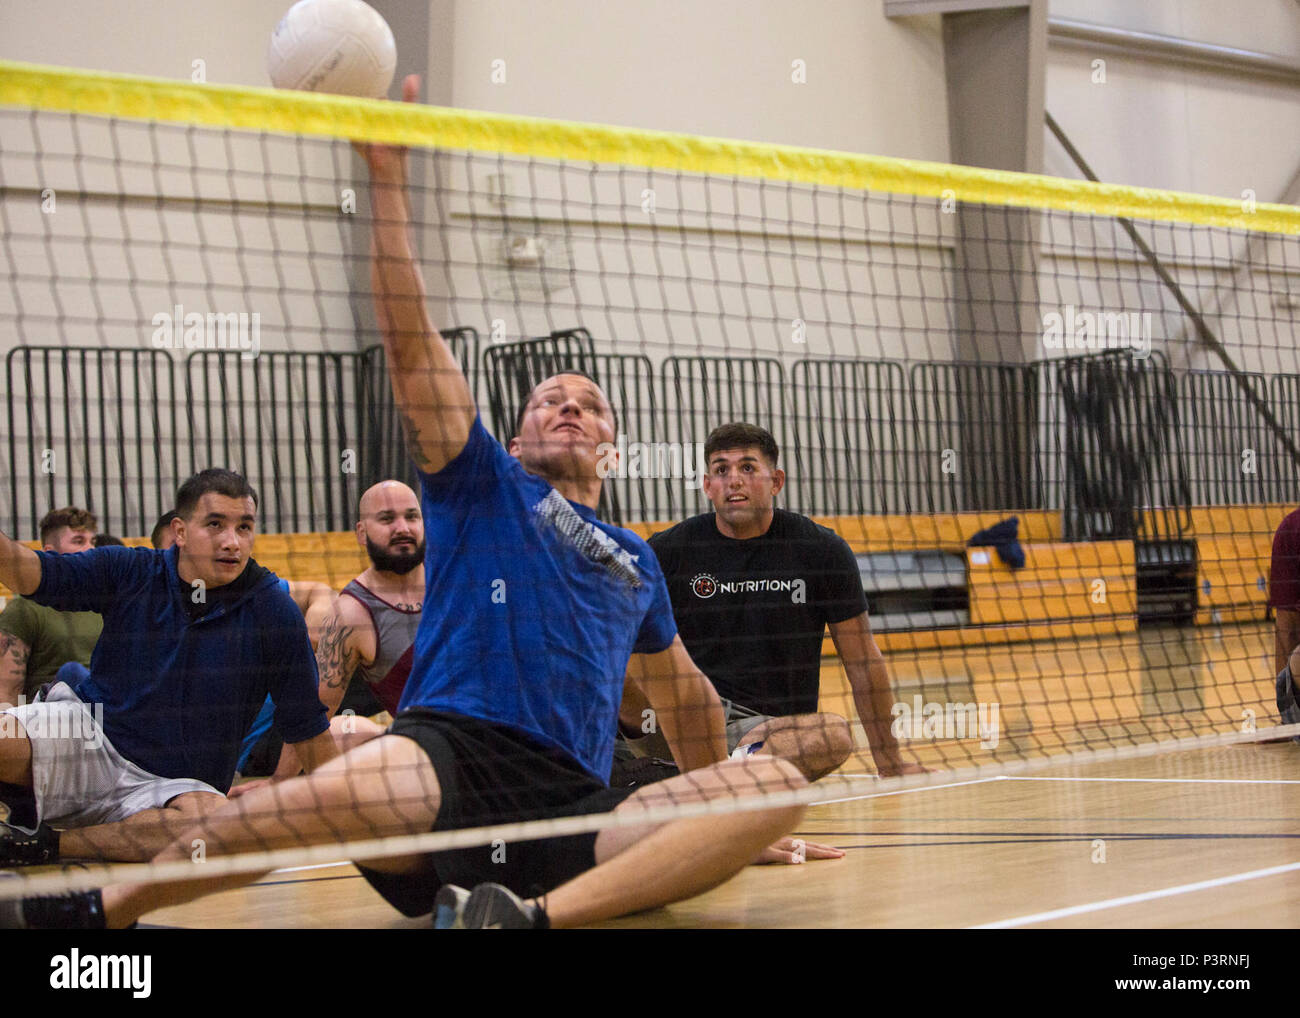 U.S. Marine Corps Gunnery Sgt. Dorian Gardner attempts to block the ball during sitting volleyball drills during a 2017 DoD Warrior Games training camp at Marine Corps Base Camp Pendleton, Calif., May 7, 2017. Gardner, a native of Rialto, Calif., is a member of the 2017 DoD Warrior Games Team Marine Corps. The DoD Warrior Games is an adaptive sports competition for wounded, ill and injured service members and veterans. Stock Photo